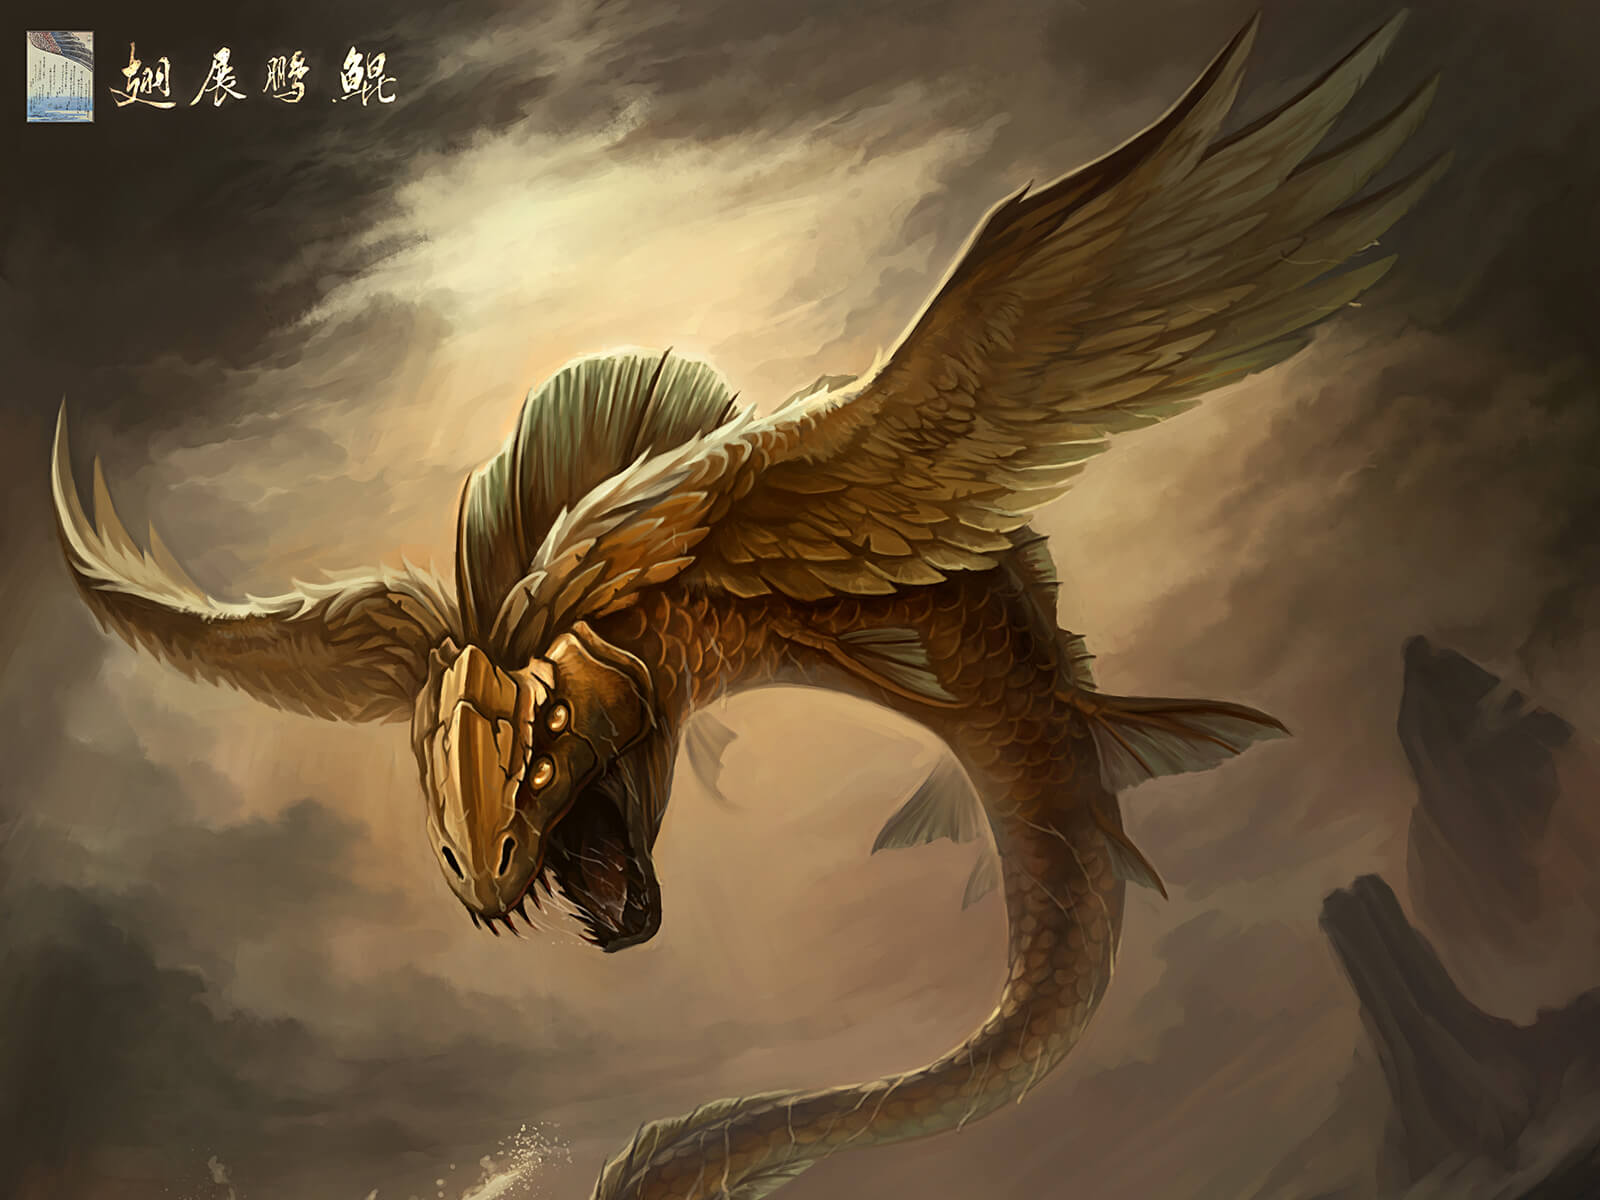 A large, golden, winged fish with four eyes hovers above a dark turbulent sea baring its razor-sharp fangs.